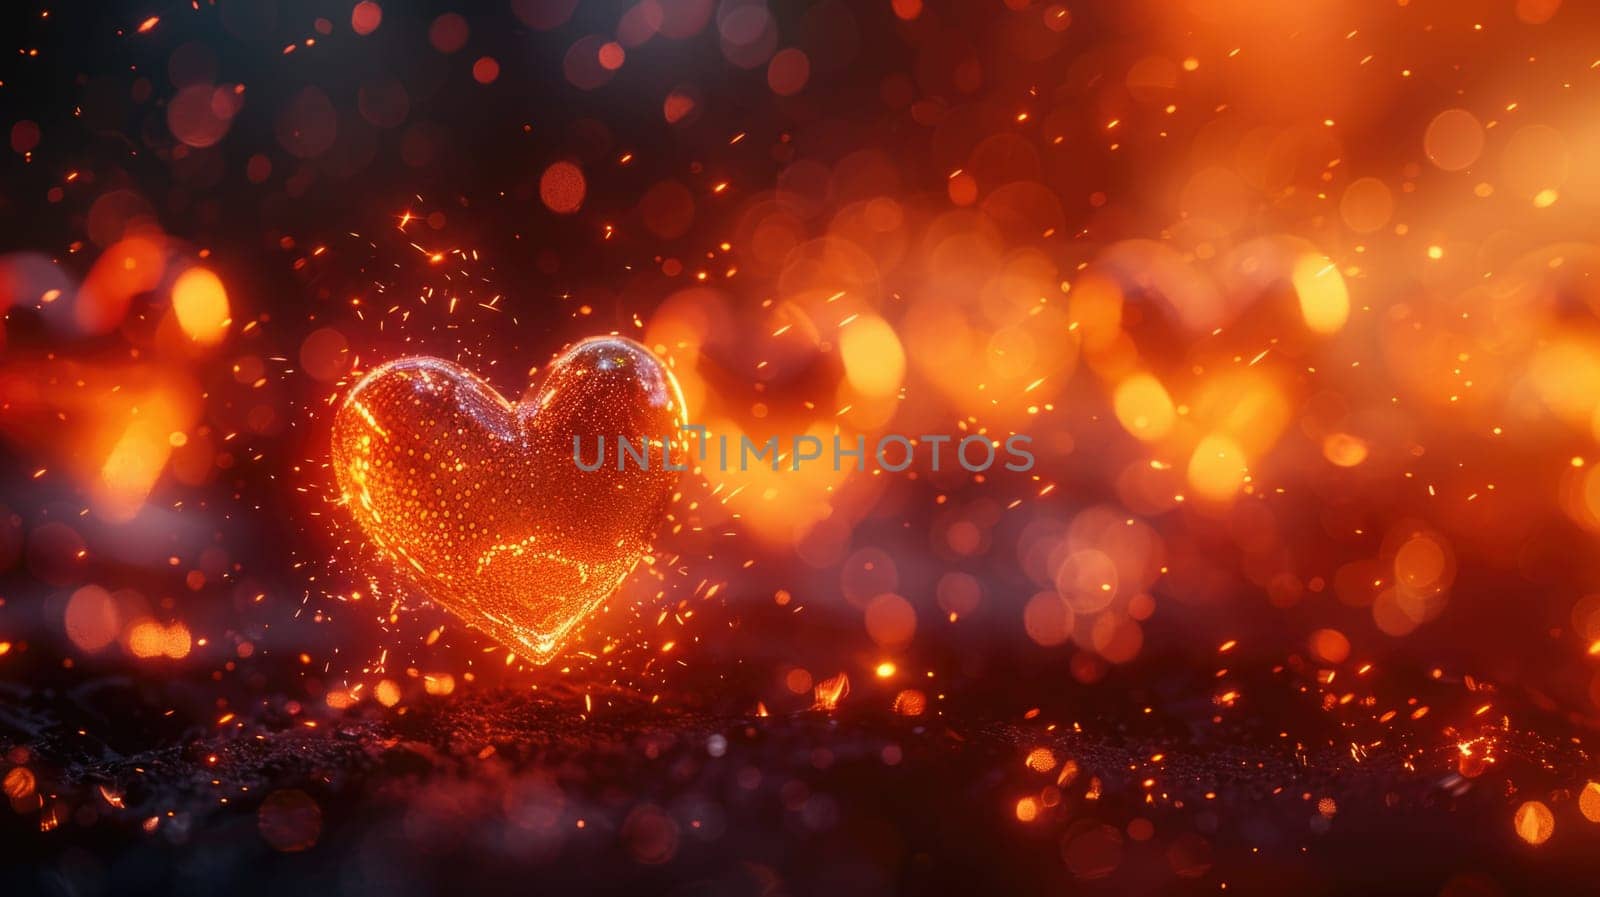 Heart-Shaped Object on Blurry Background by but_photo